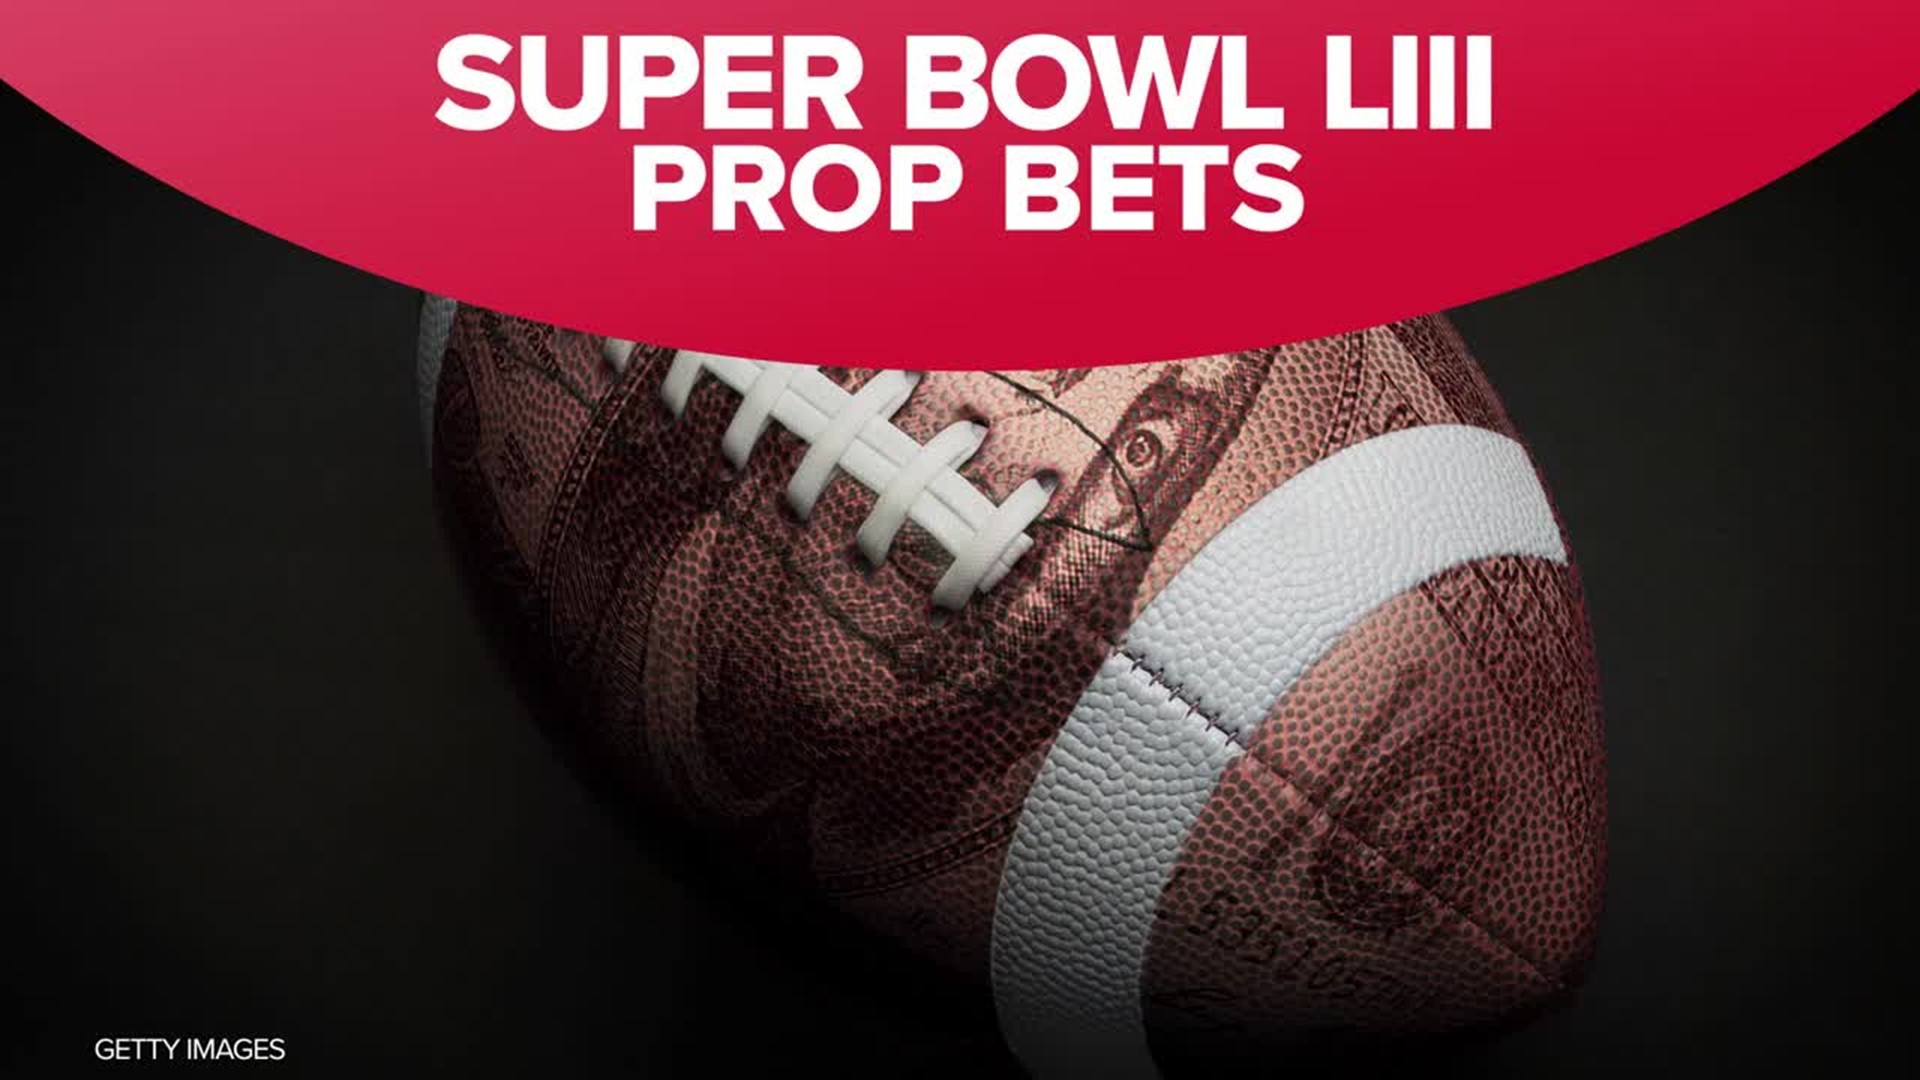 5 tips for throwing a great Super Bowl party